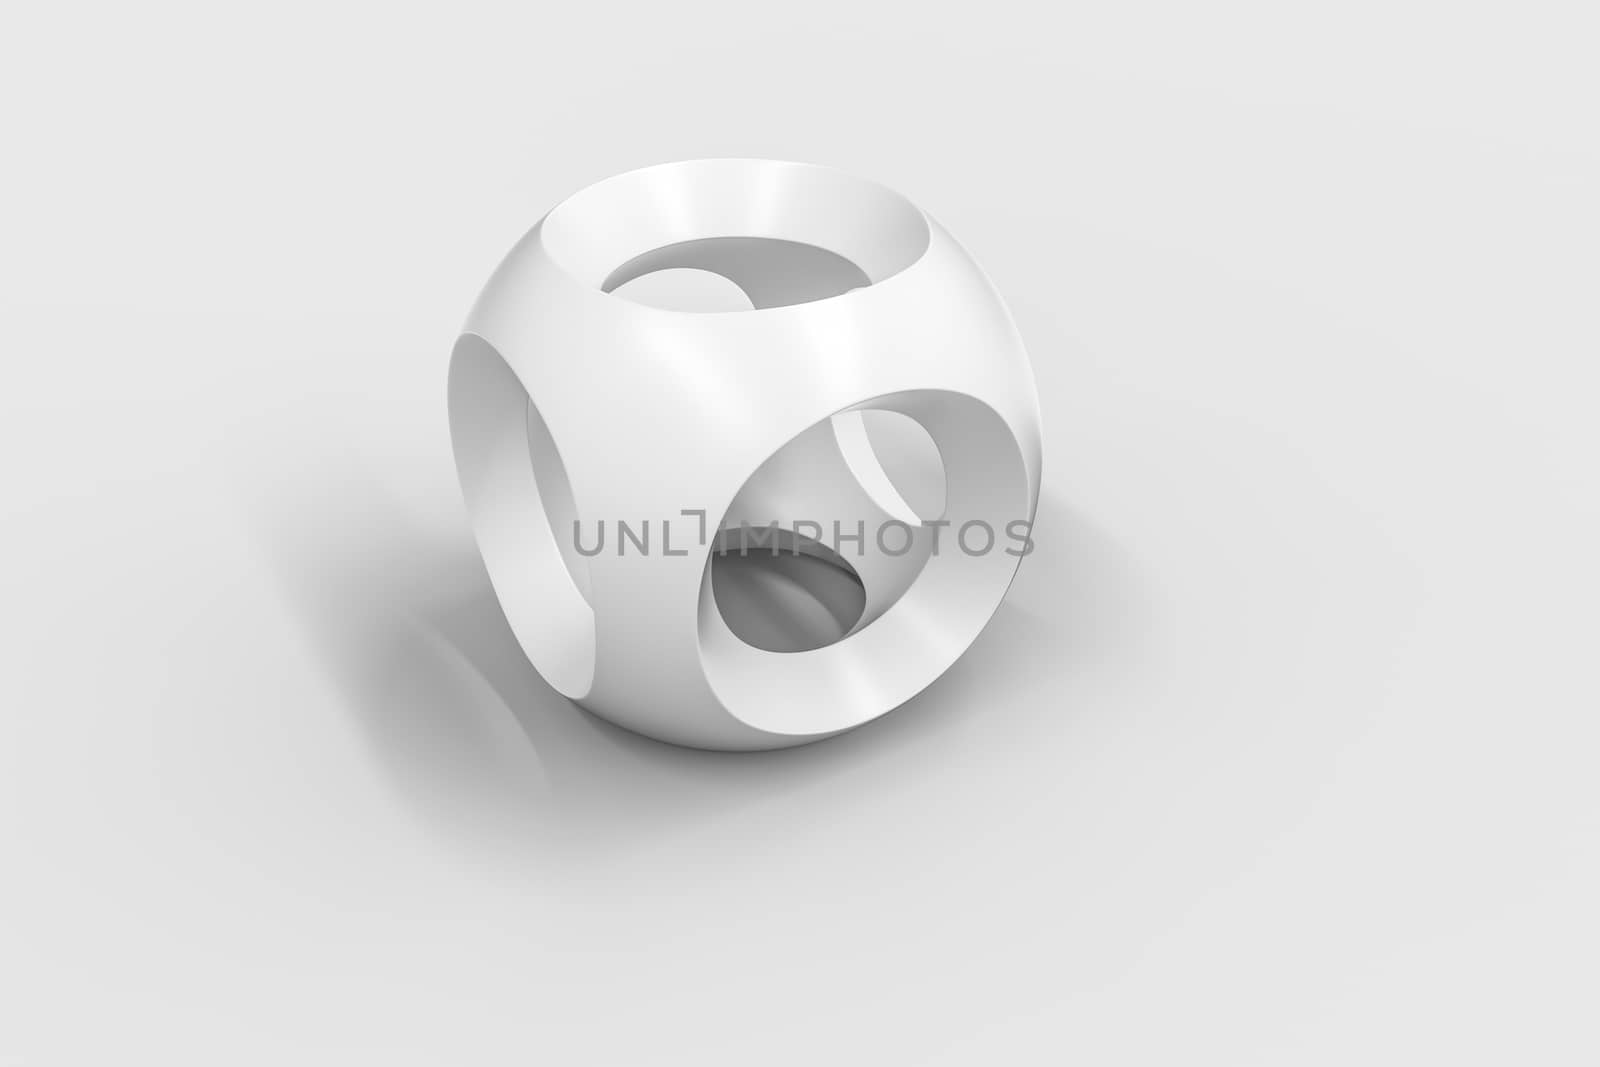 3d rendering, creative cubes in white backdrop, industrial design product by vinkfan